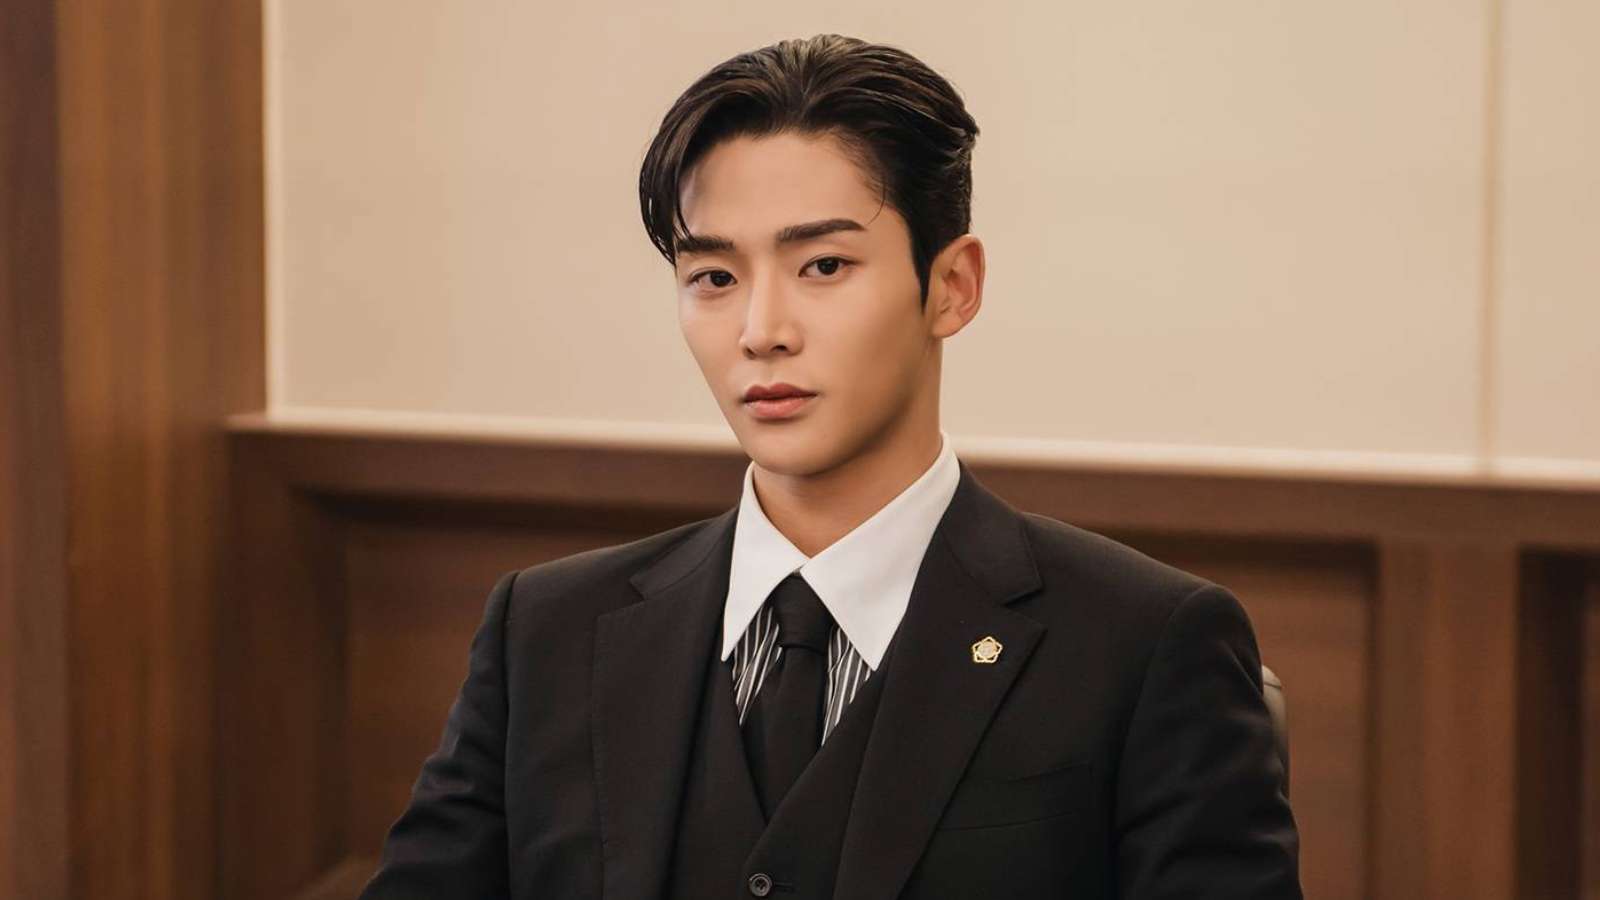 Destined With You stars Rowoon as a handsome and cursed lawyer Shin-yu